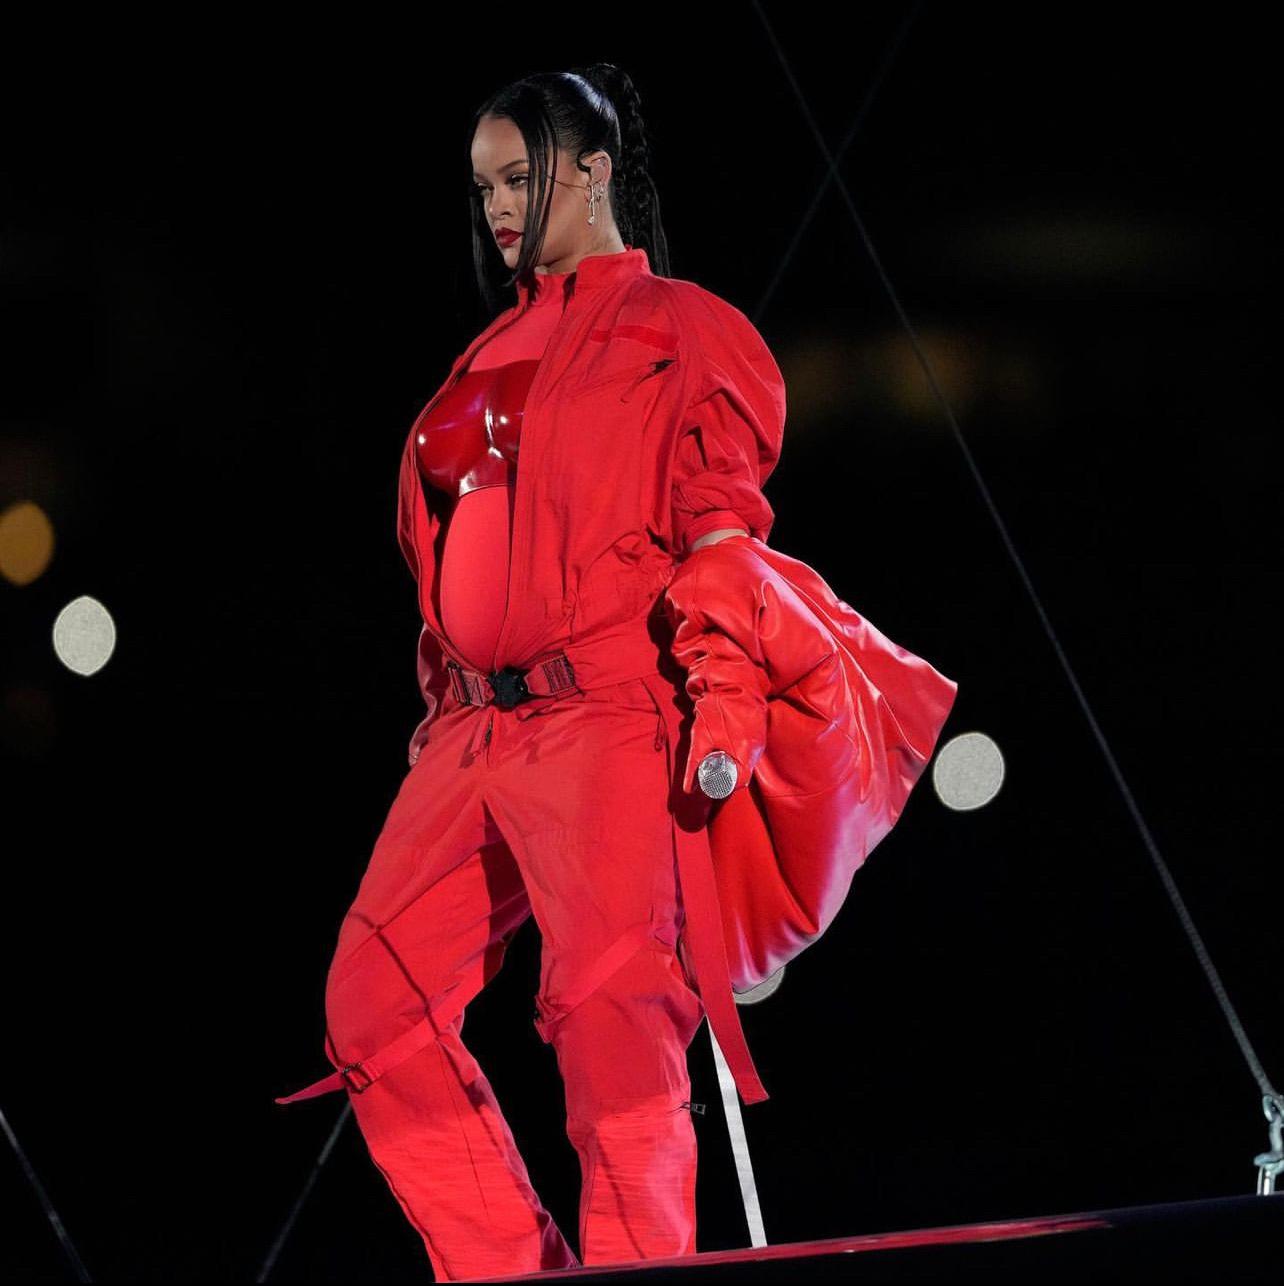 Rihanna's Half-Time Performance Takes Super Bowl Ratings To An All-Time High